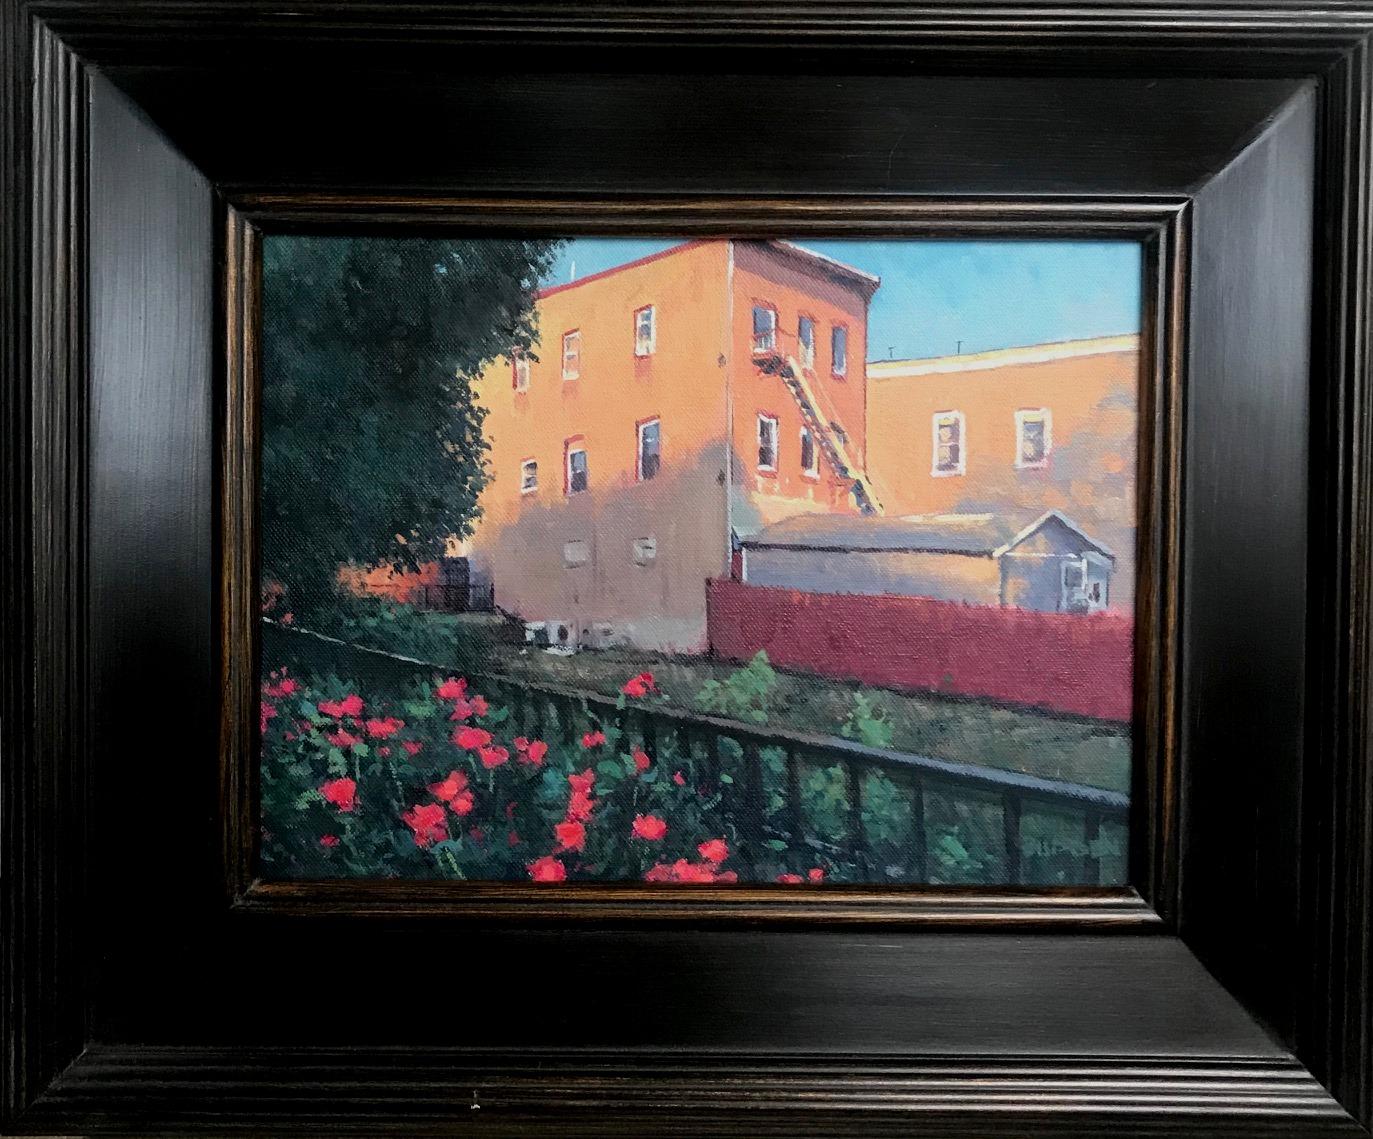 Shadoow & Light, Bordentown City
oil/panel
9 x 12 image
Here is an oil painting that showcases a cityscape dressed in a beautiful quality of light. The image is inspired by a a view along Railroad Avenue in Bordentown NJ where the artist grew up and